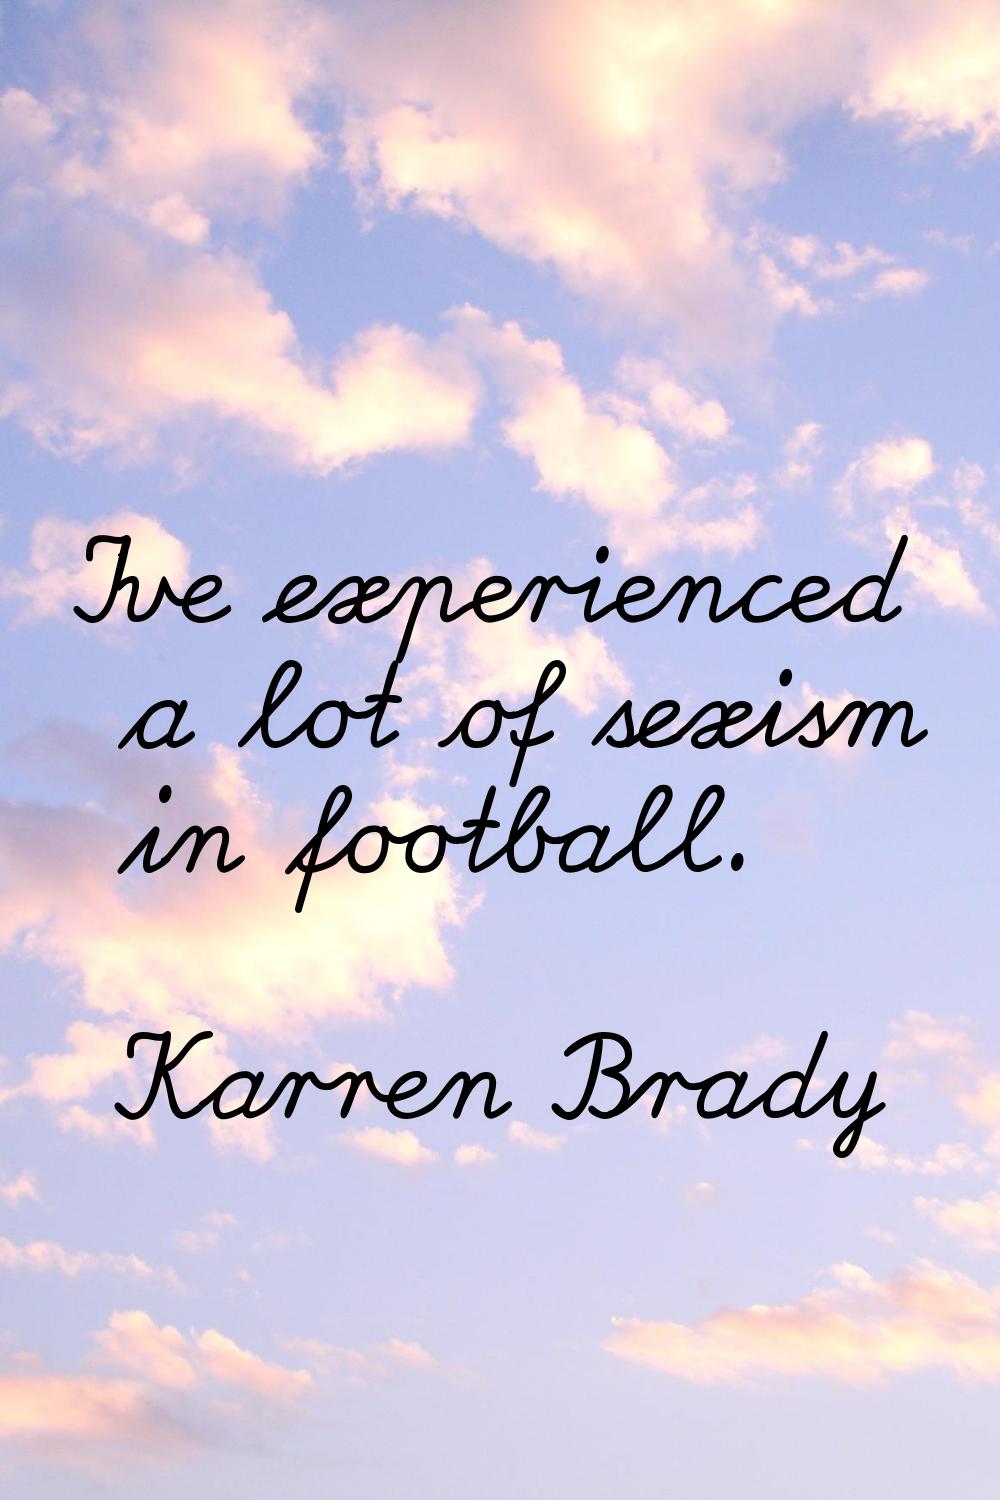 I've experienced a lot of sexism in football.